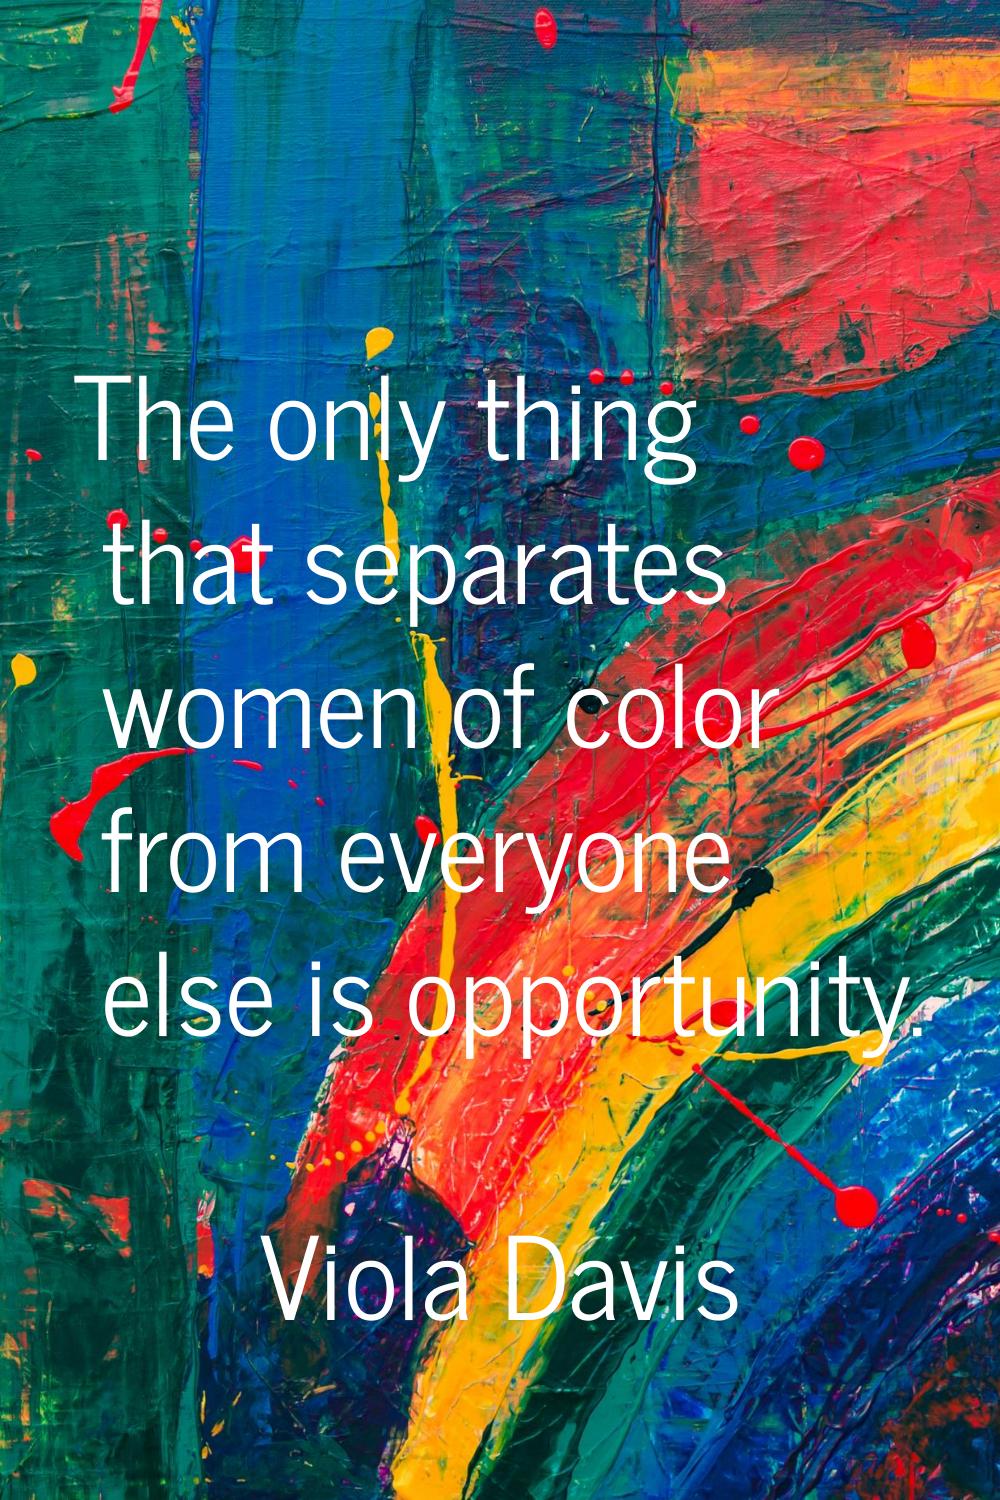 The only thing that separates women of color from everyone else is opportunity.